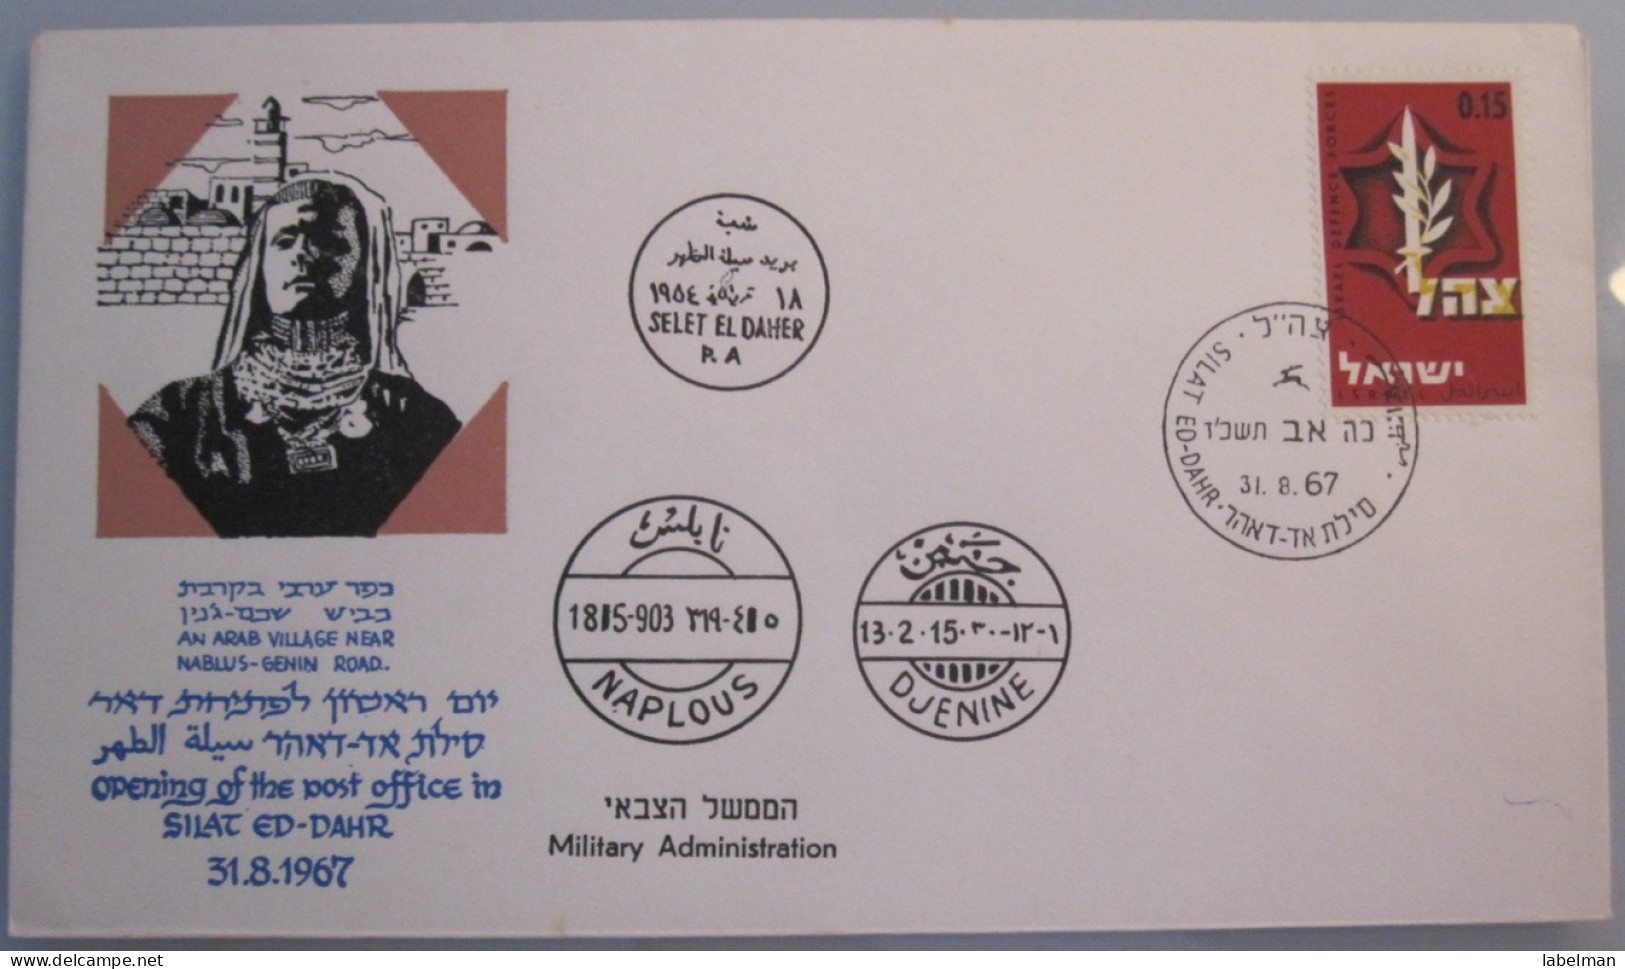 1967 POO FIRST DAY POST OFFICE OPENING MILITARY GOVERNMENT SILAT EL DAHR PALESTINE 6 DAYS WAR COVER ISRAEL CACHET - Covers & Documents